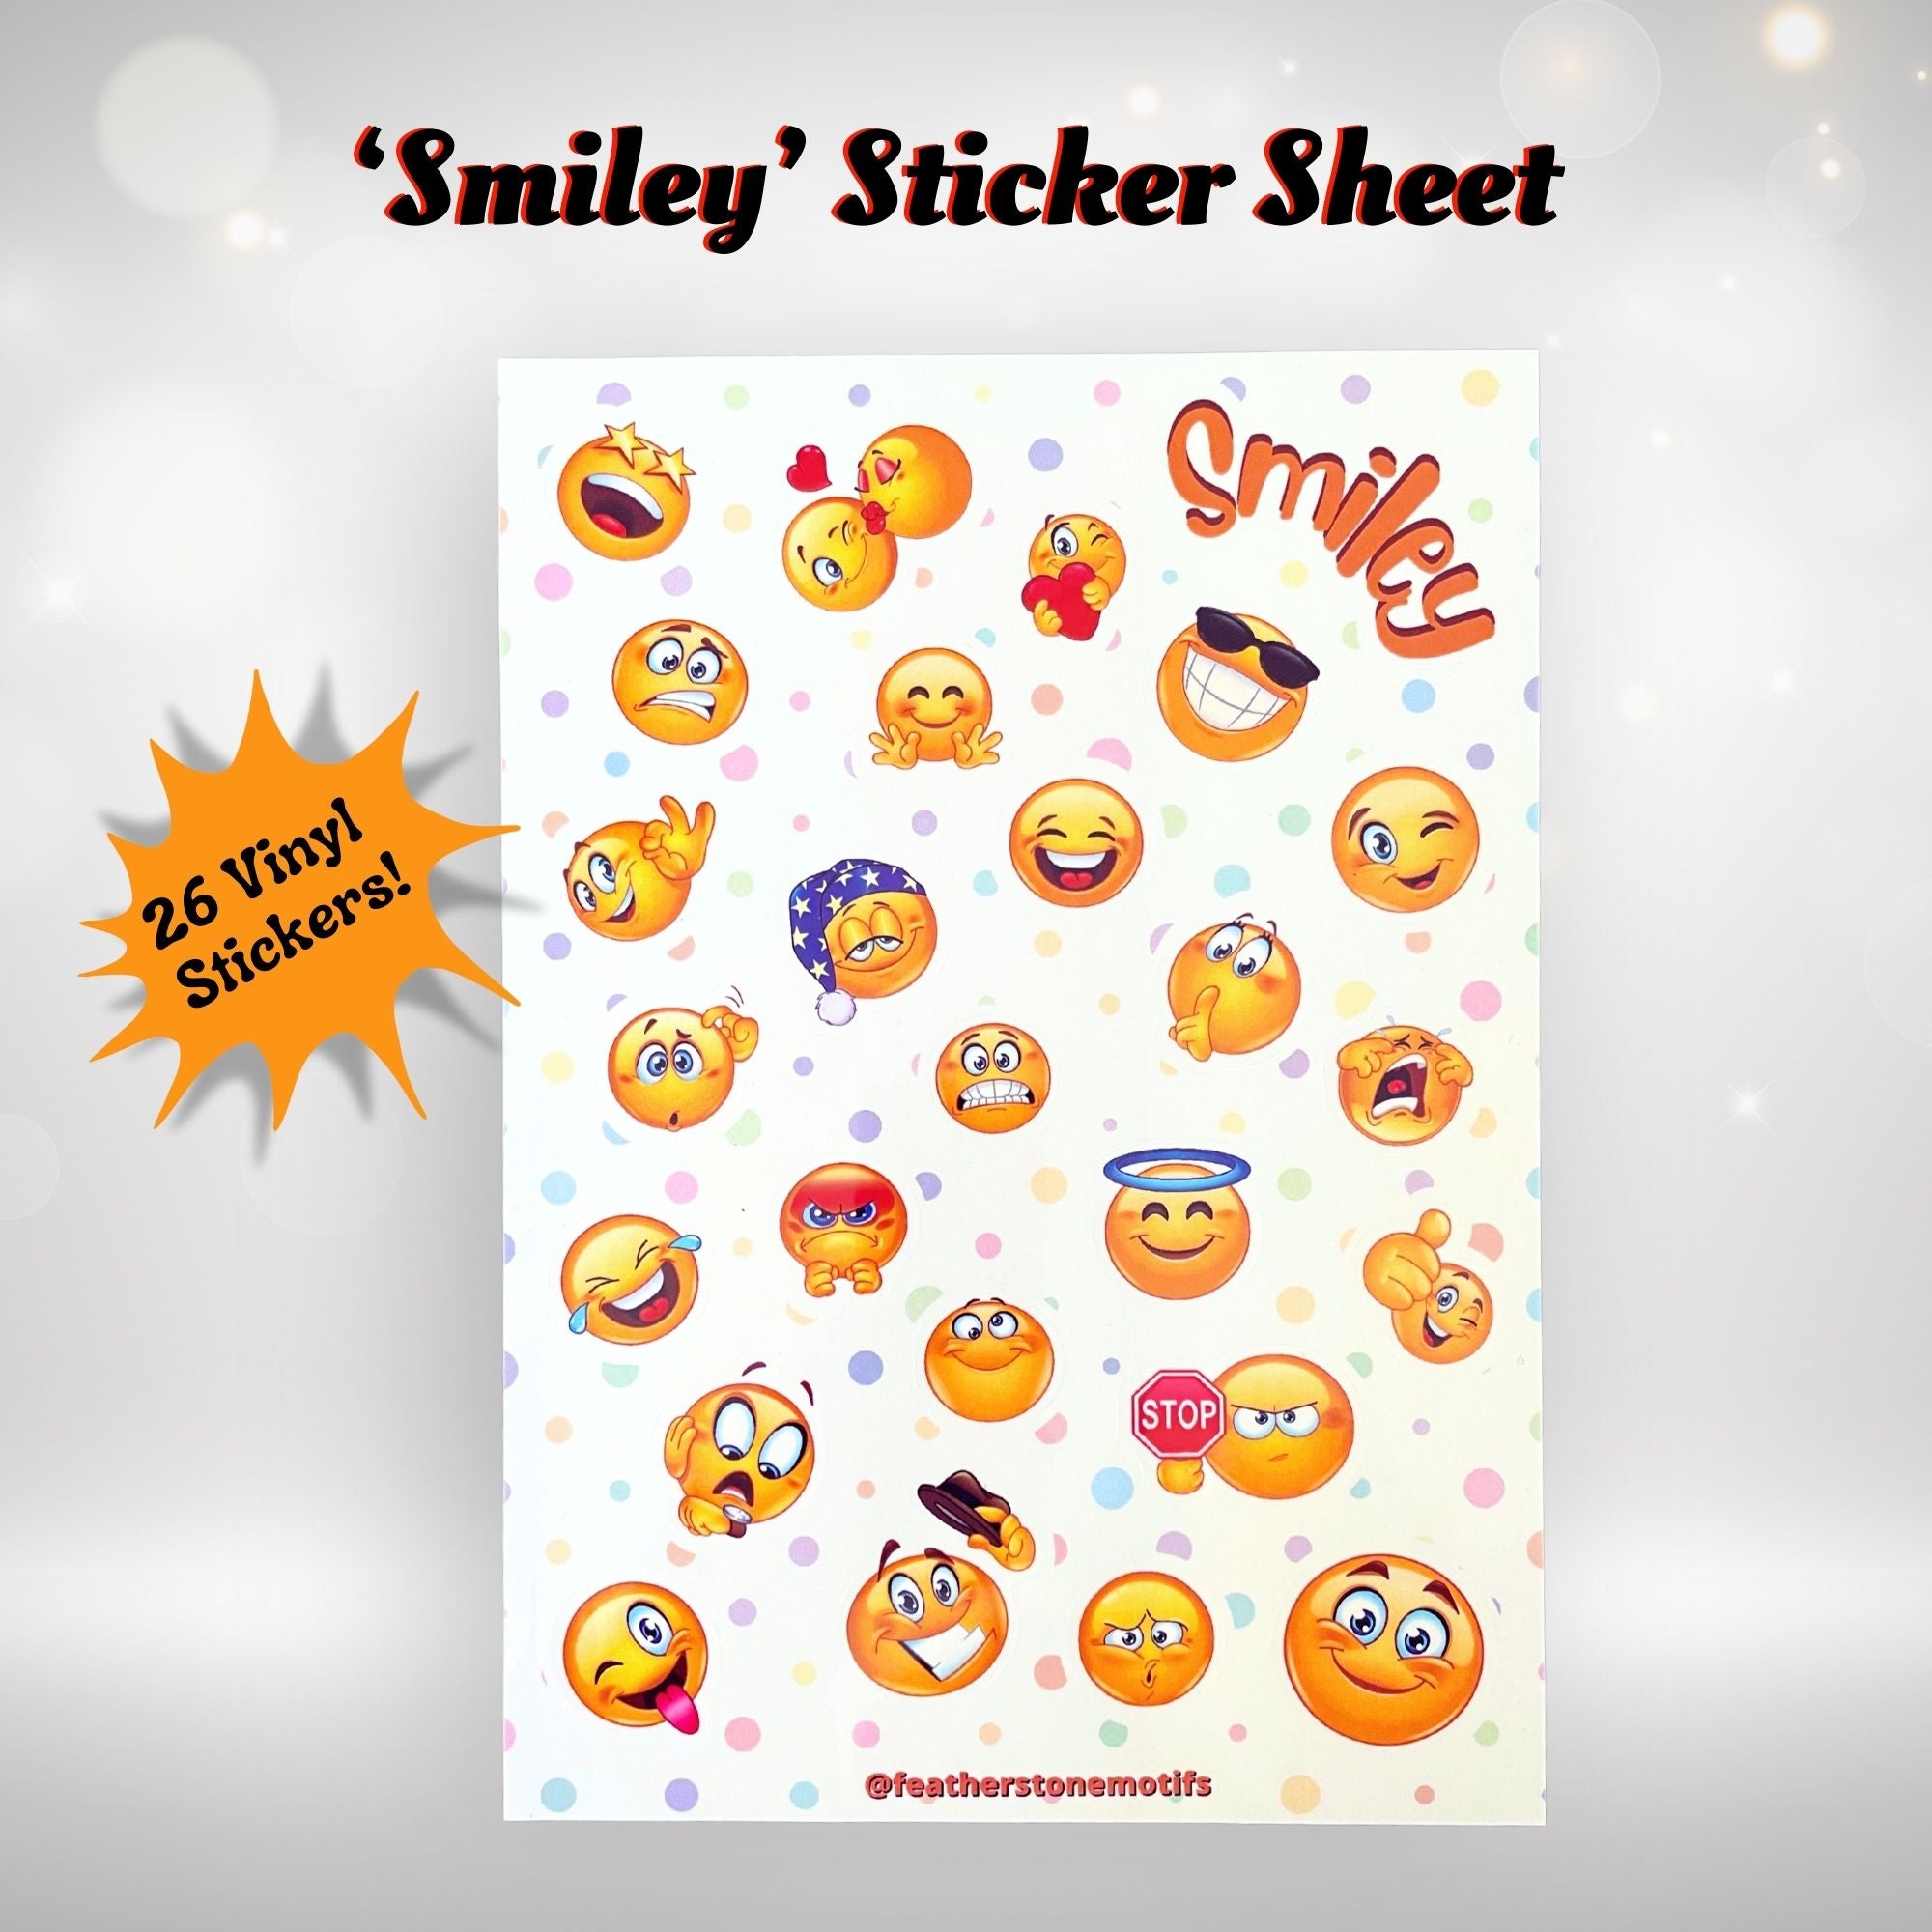 This image shows the Smiley sticker sheet with 26 vinyl stickers that is included in the Smiley themed Camp Postcard Kit.